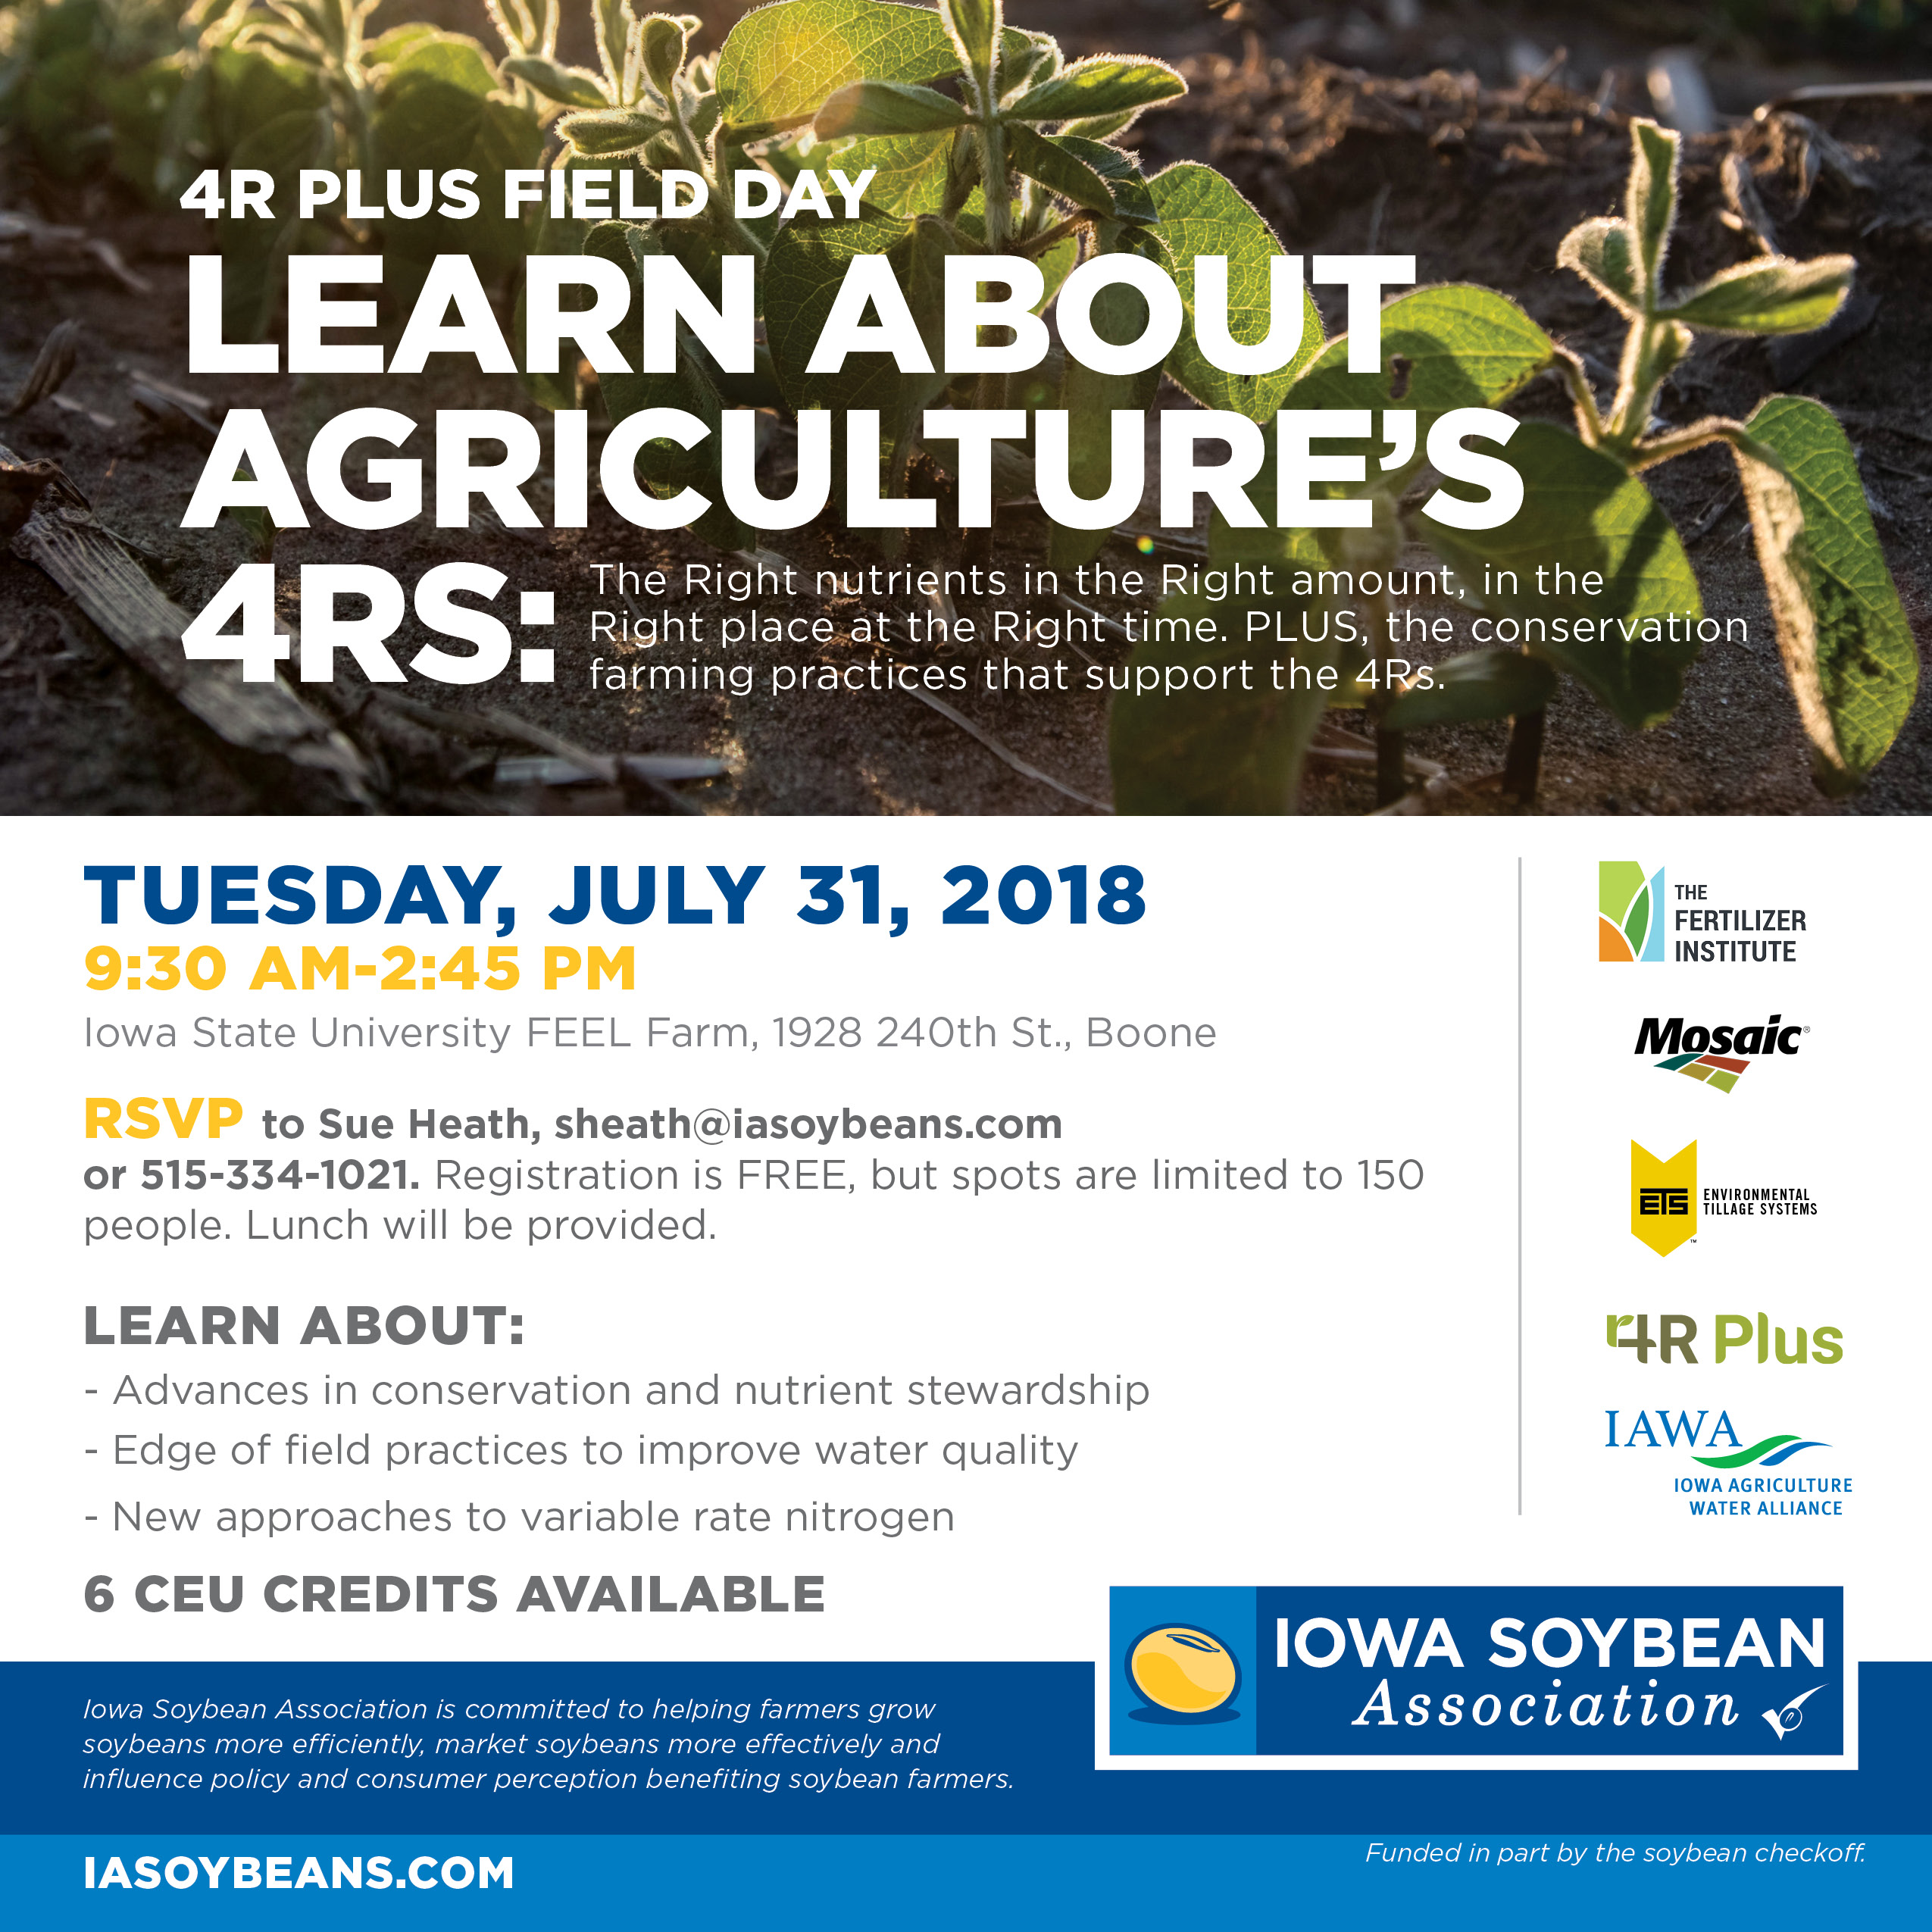 Flyer for Agriculture's 4Rs Field Day, July 31, 2018